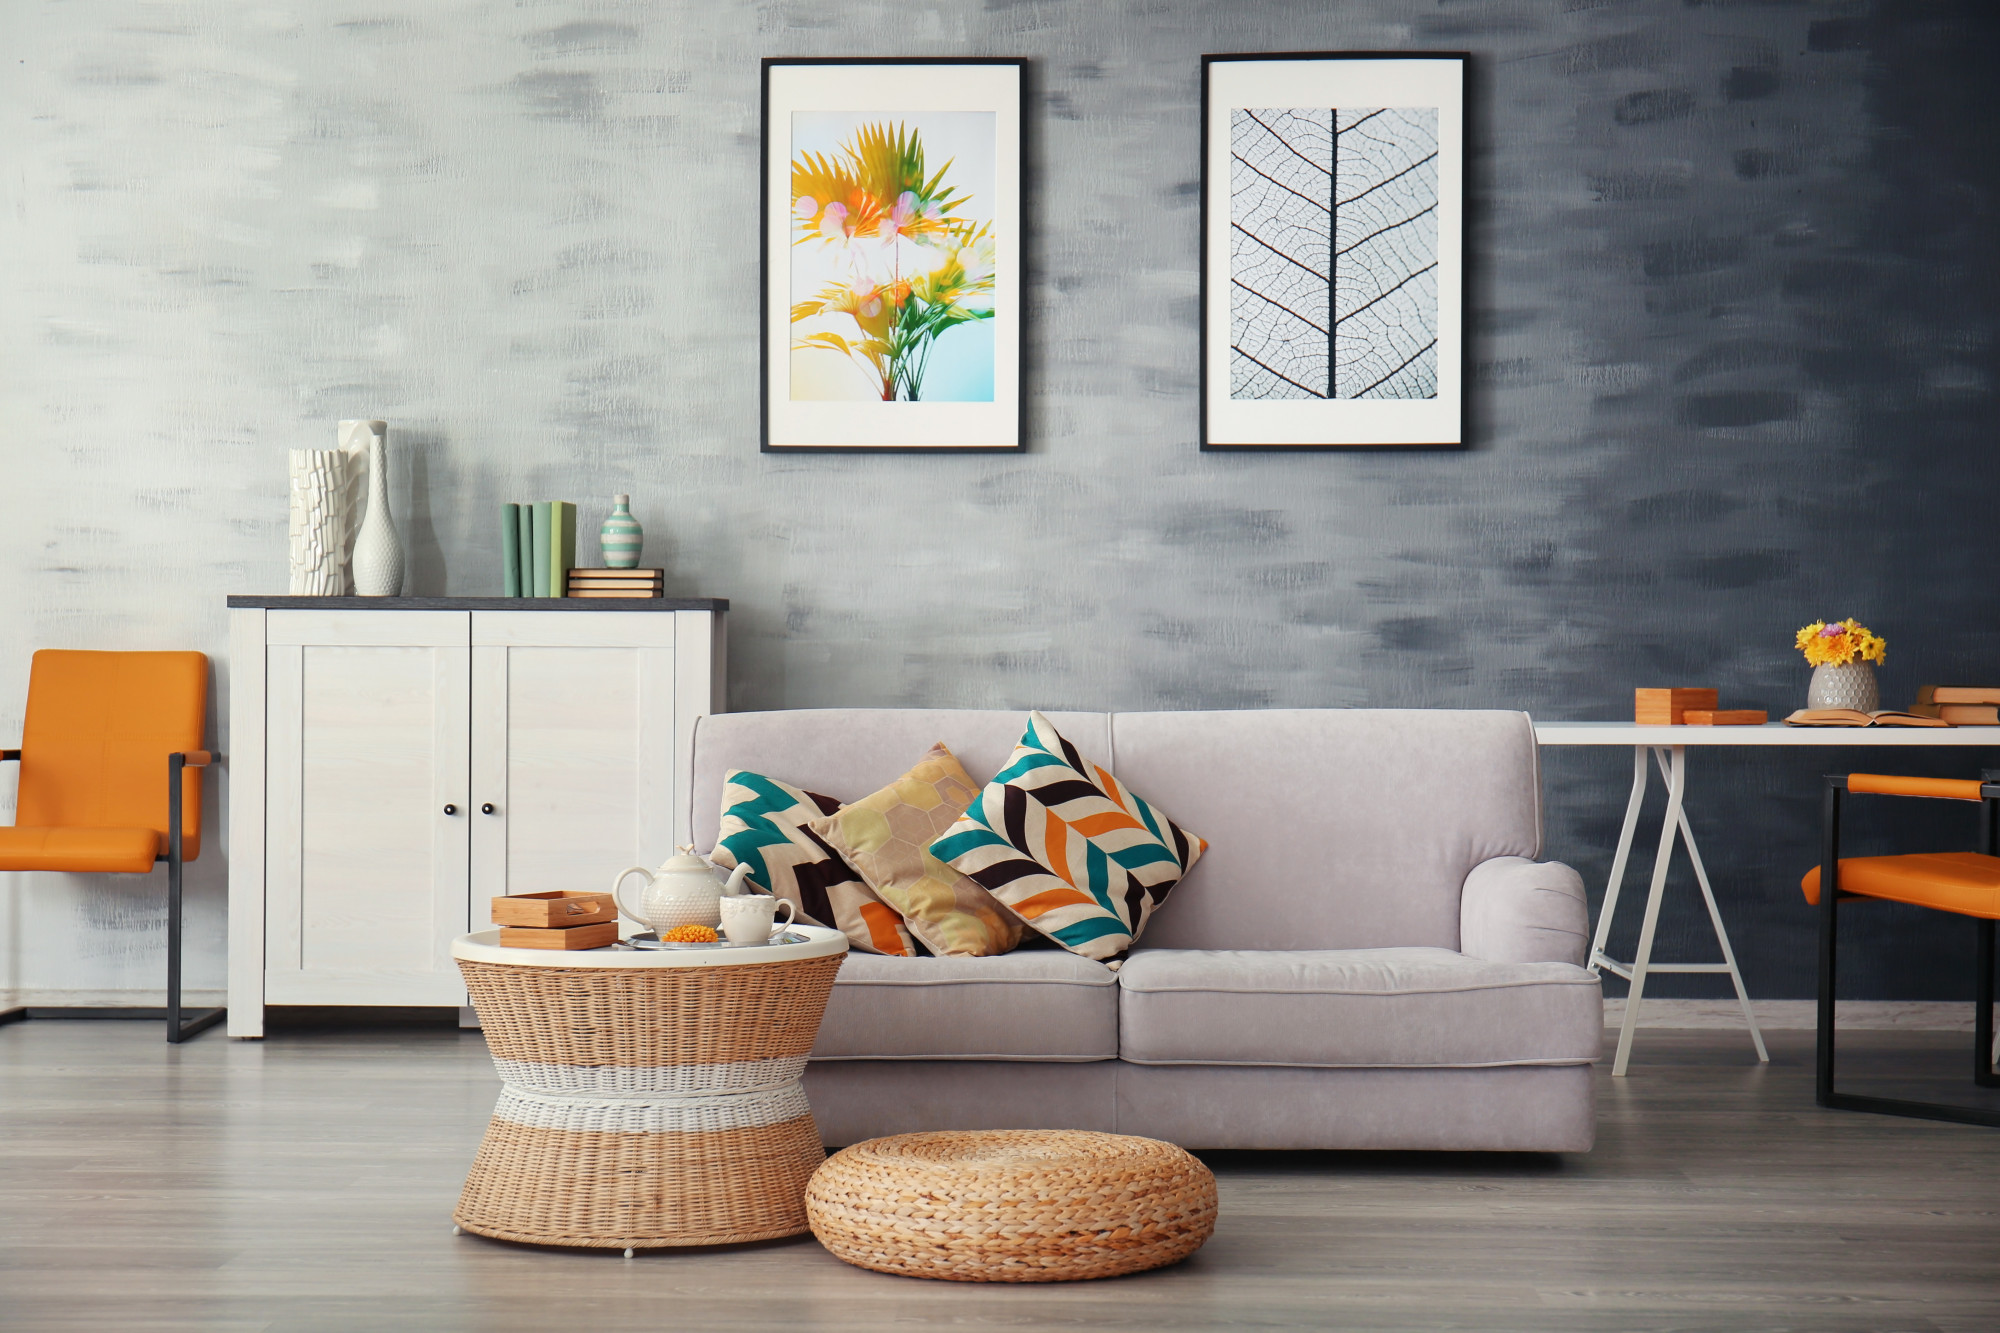 Are you in need of new furniture for your living room space? Check out our complete guide on how to choose the best living room furniture.